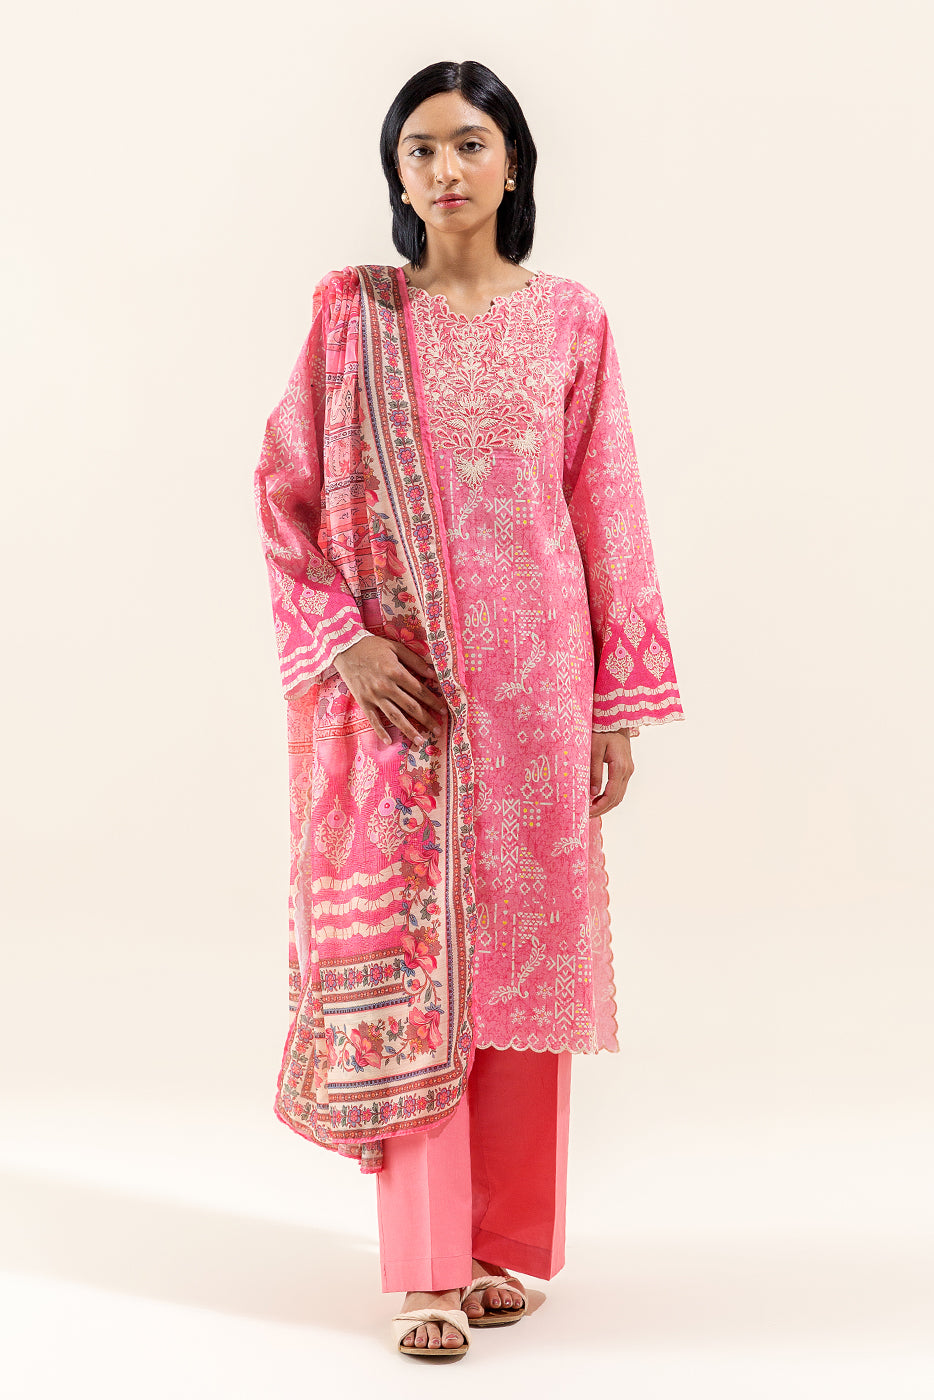 3 PIECE EMBROIDERED LAWN SUIT-ROUGE GLEAM (UNSTITCHED)